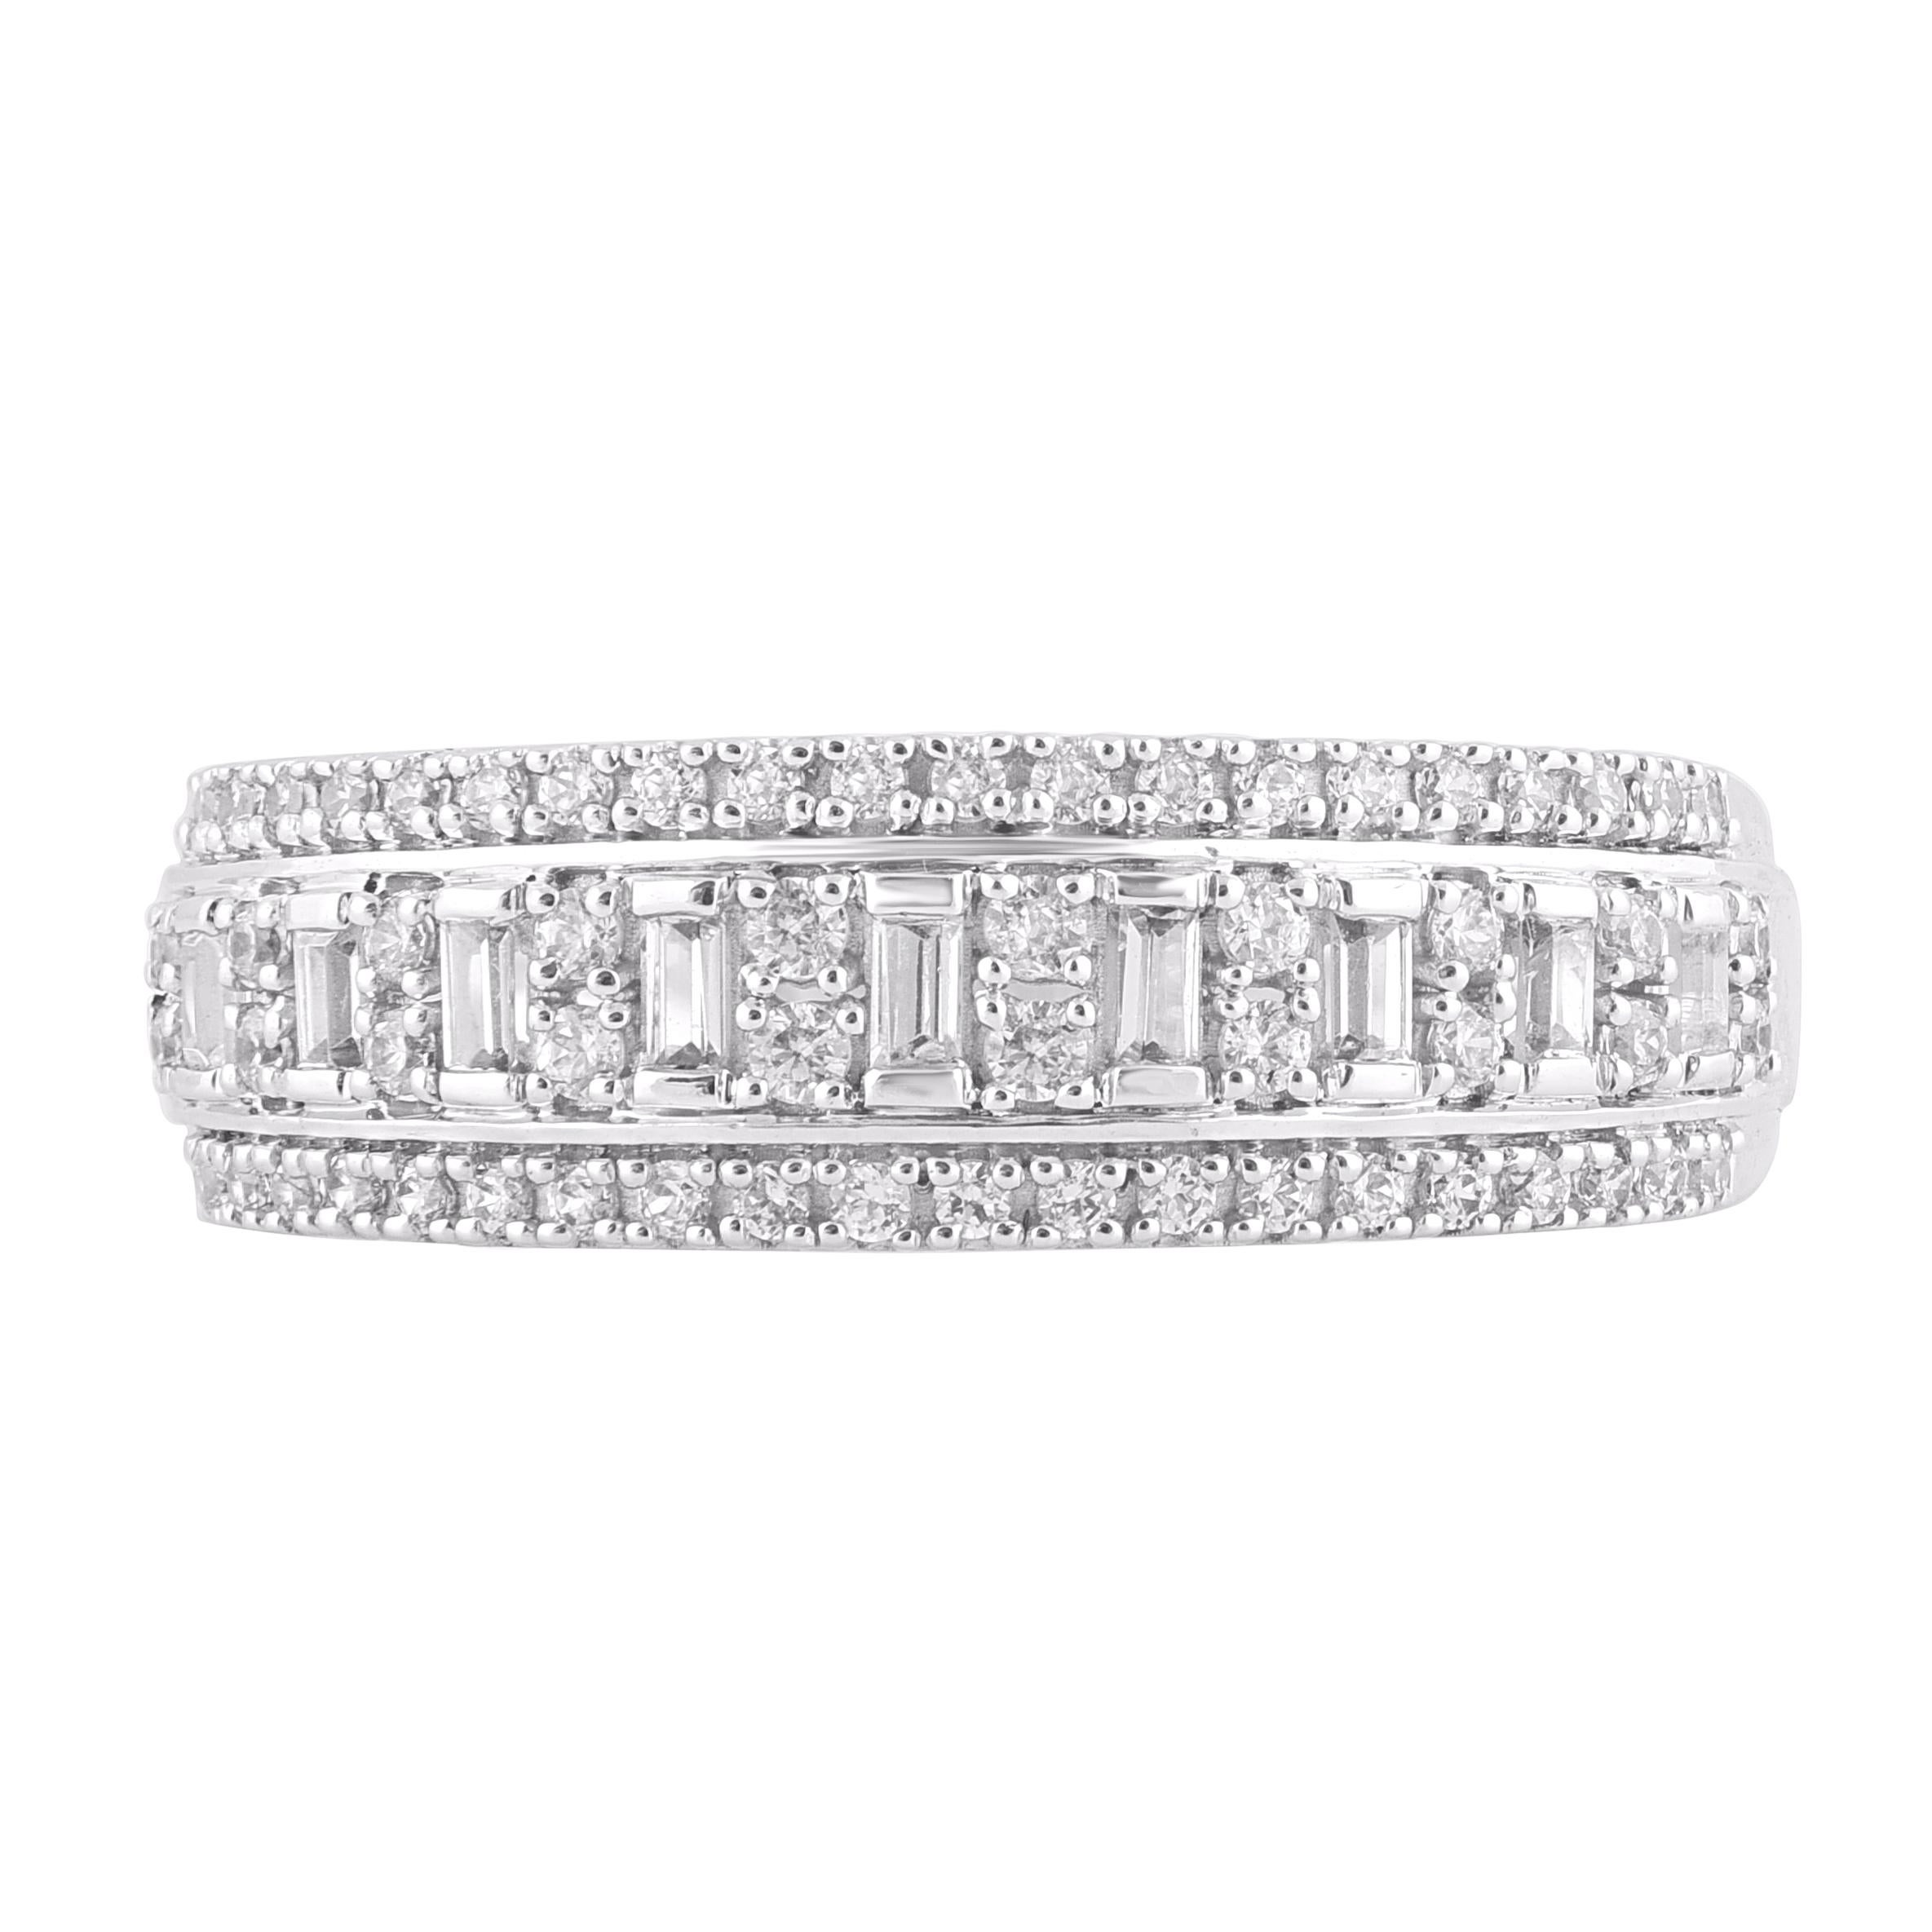 Make your most special and precious day shine with this wedding band ring. These band ring are studded with 69 brilliant cut, single cut and baguette cut natural diamonds in 14 karat white gold in prong and channel setting . The white diamonds are